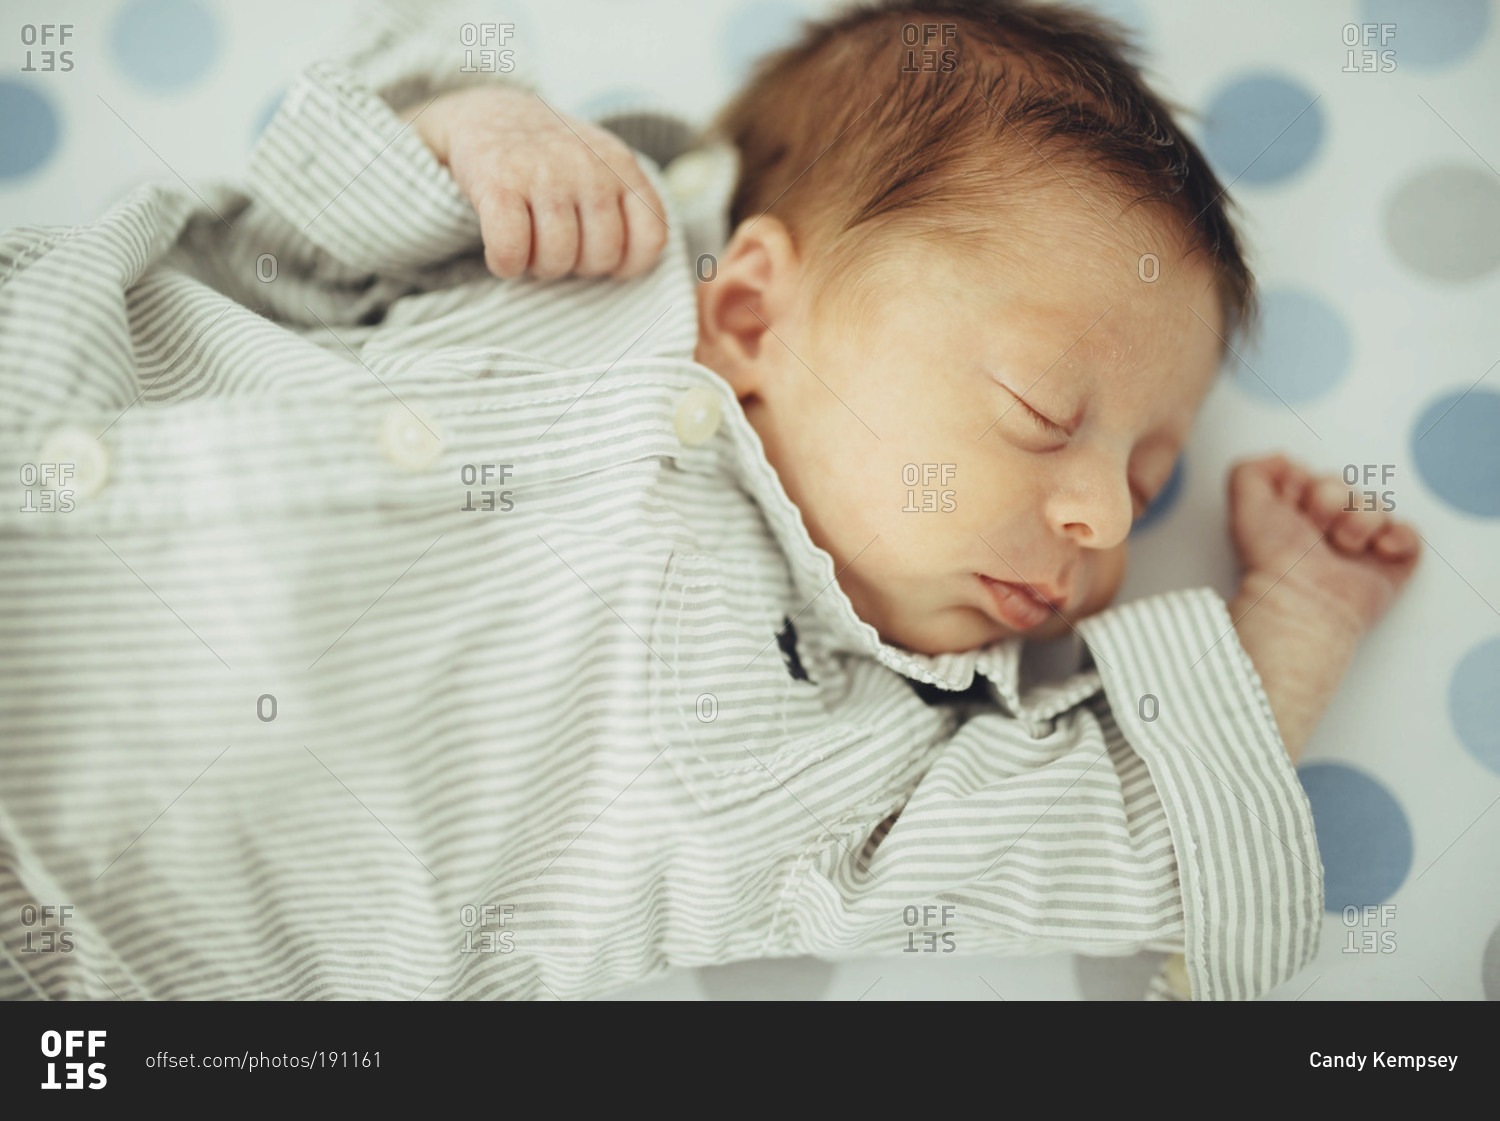 Newborn baby in button up shirt sleeping on back